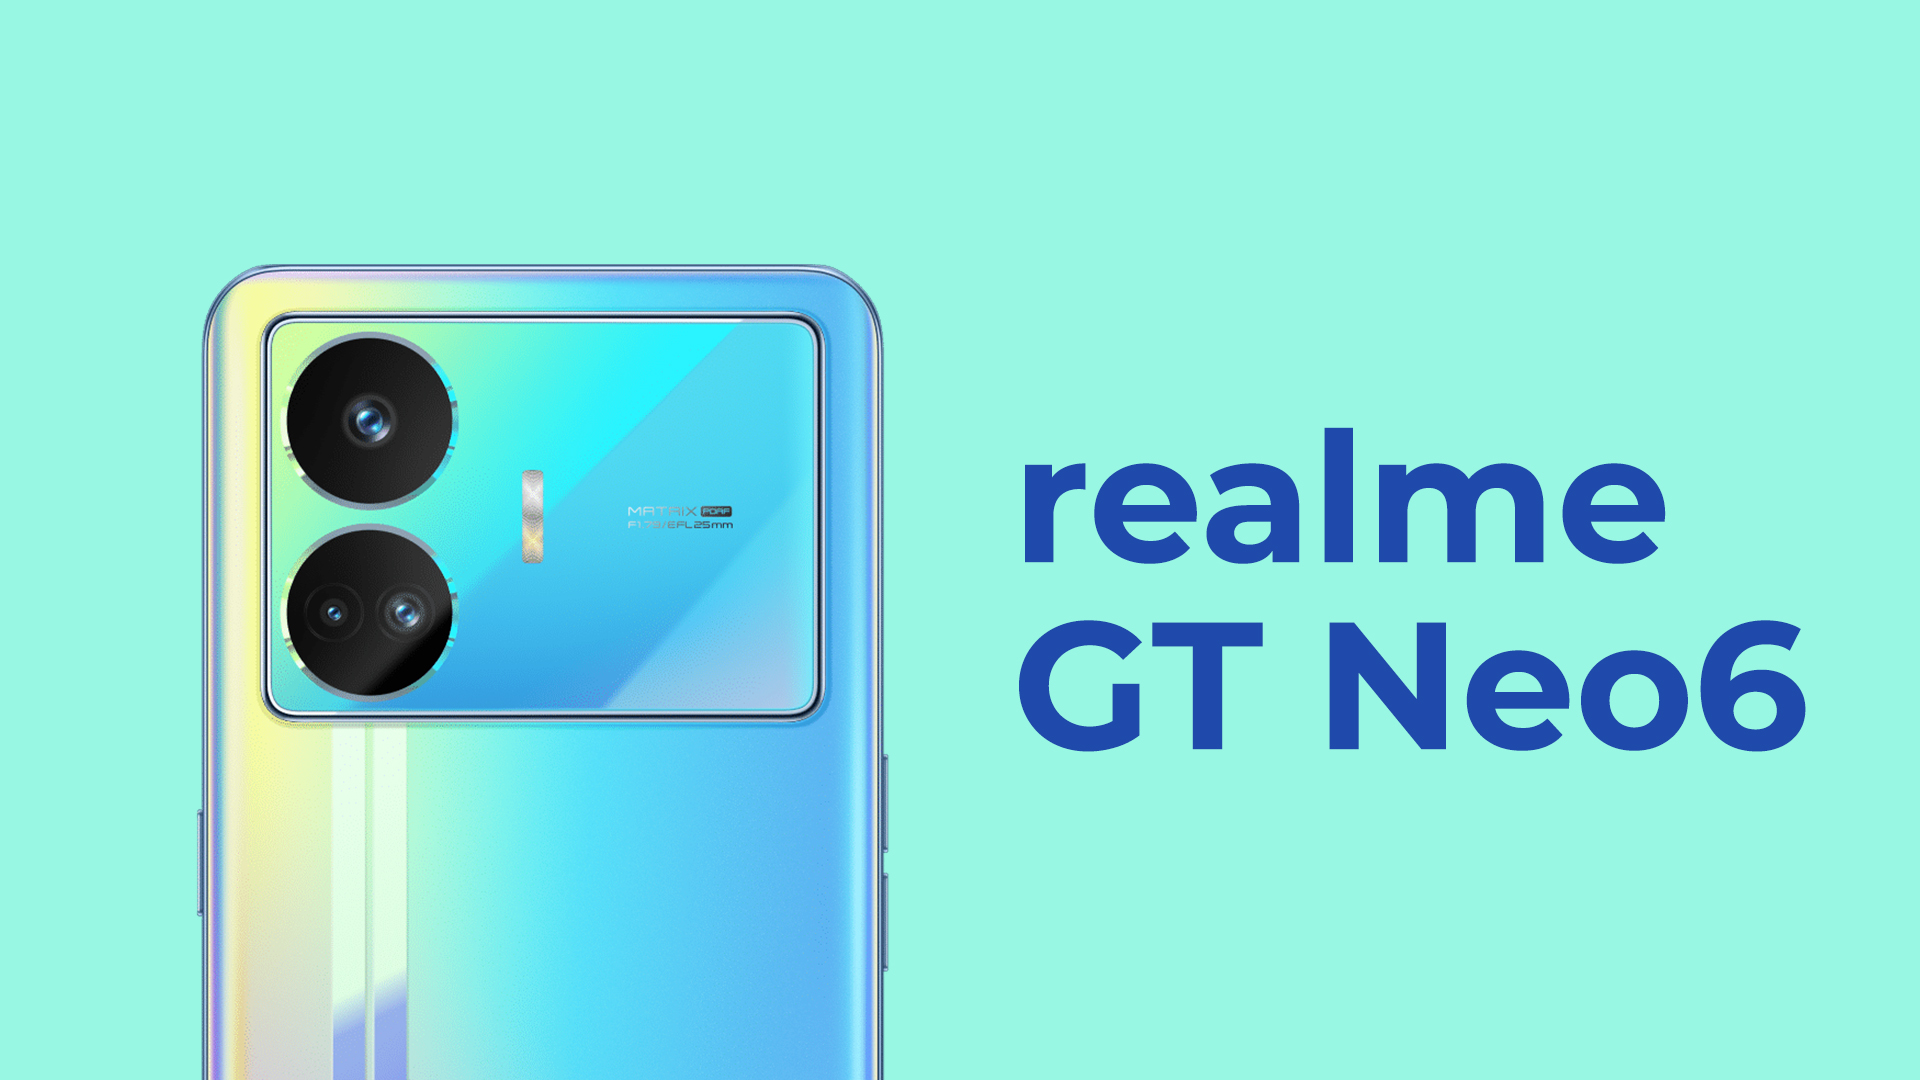 The realme GT Neo6 Leaked Specifications Point to a Game-Changing Flagship Device